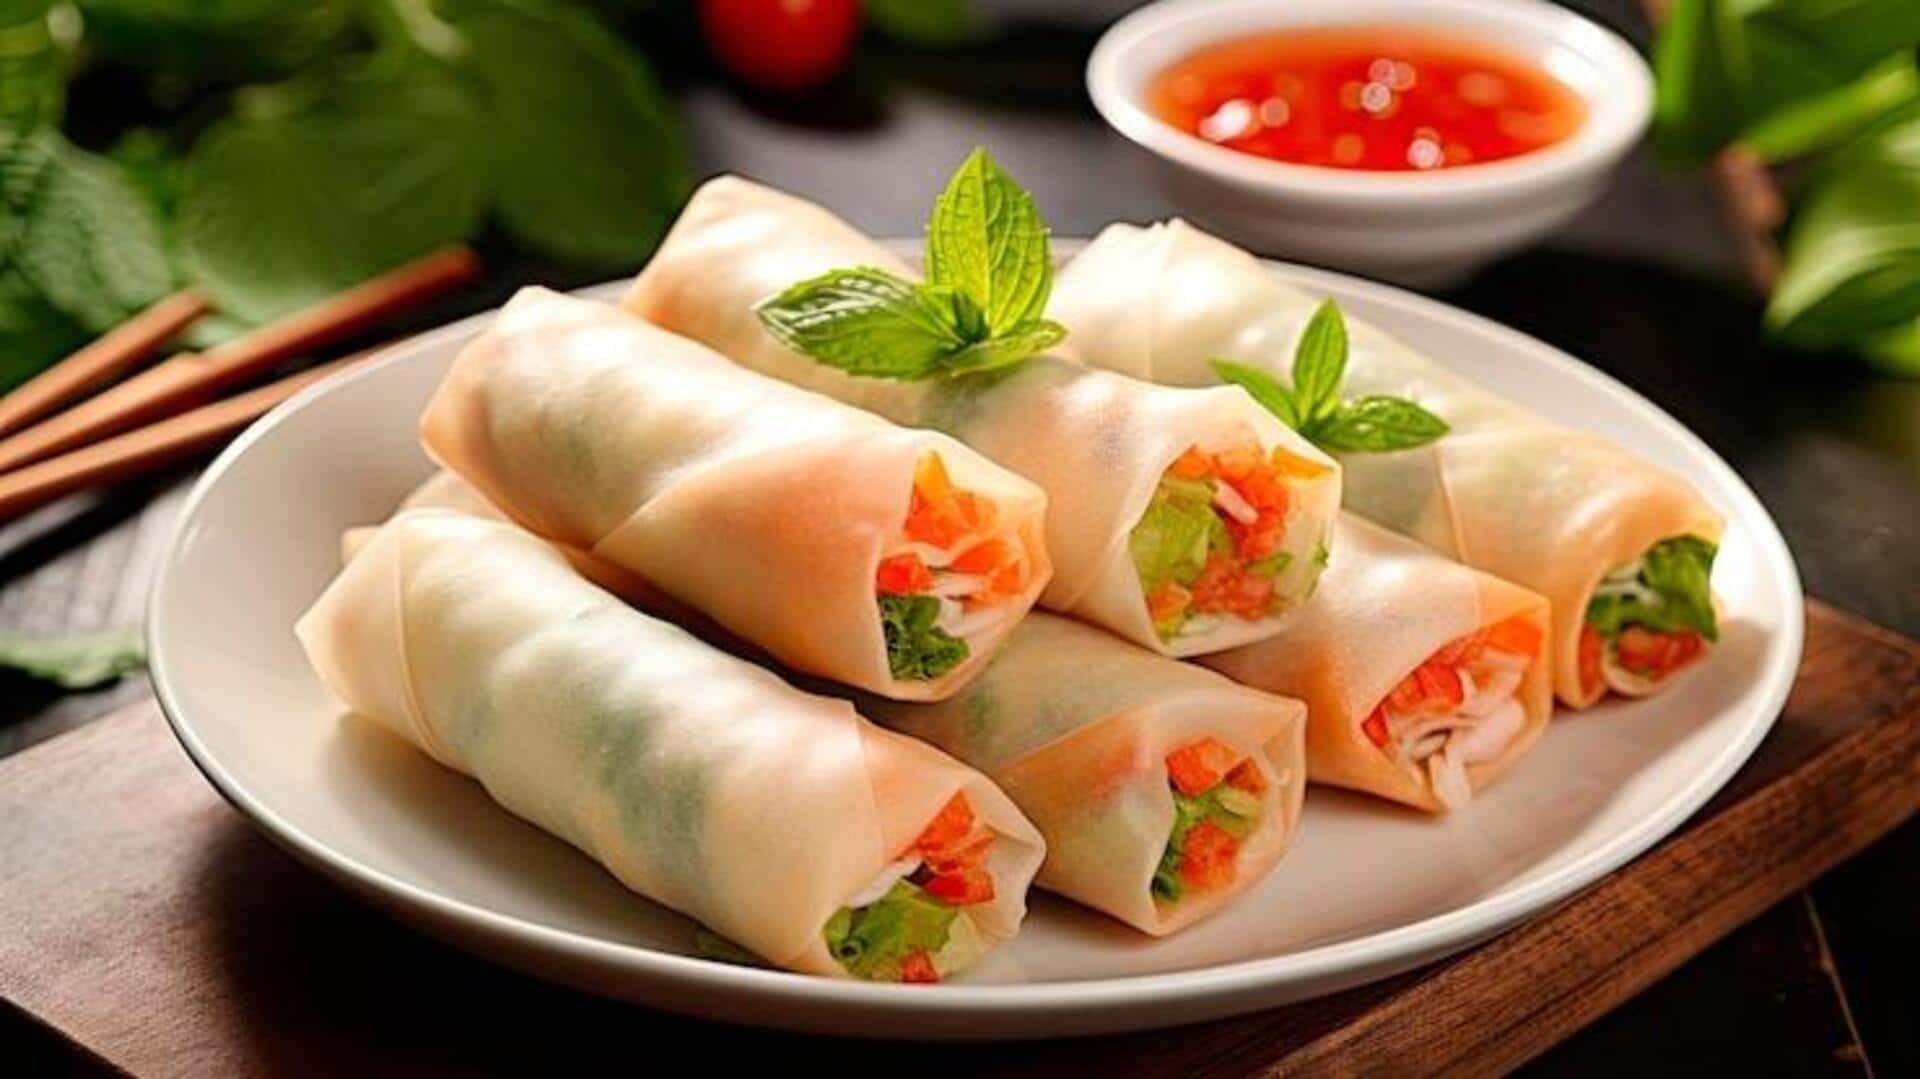 How to make Vietnamese spring rolls at home: Step-by-step recipe